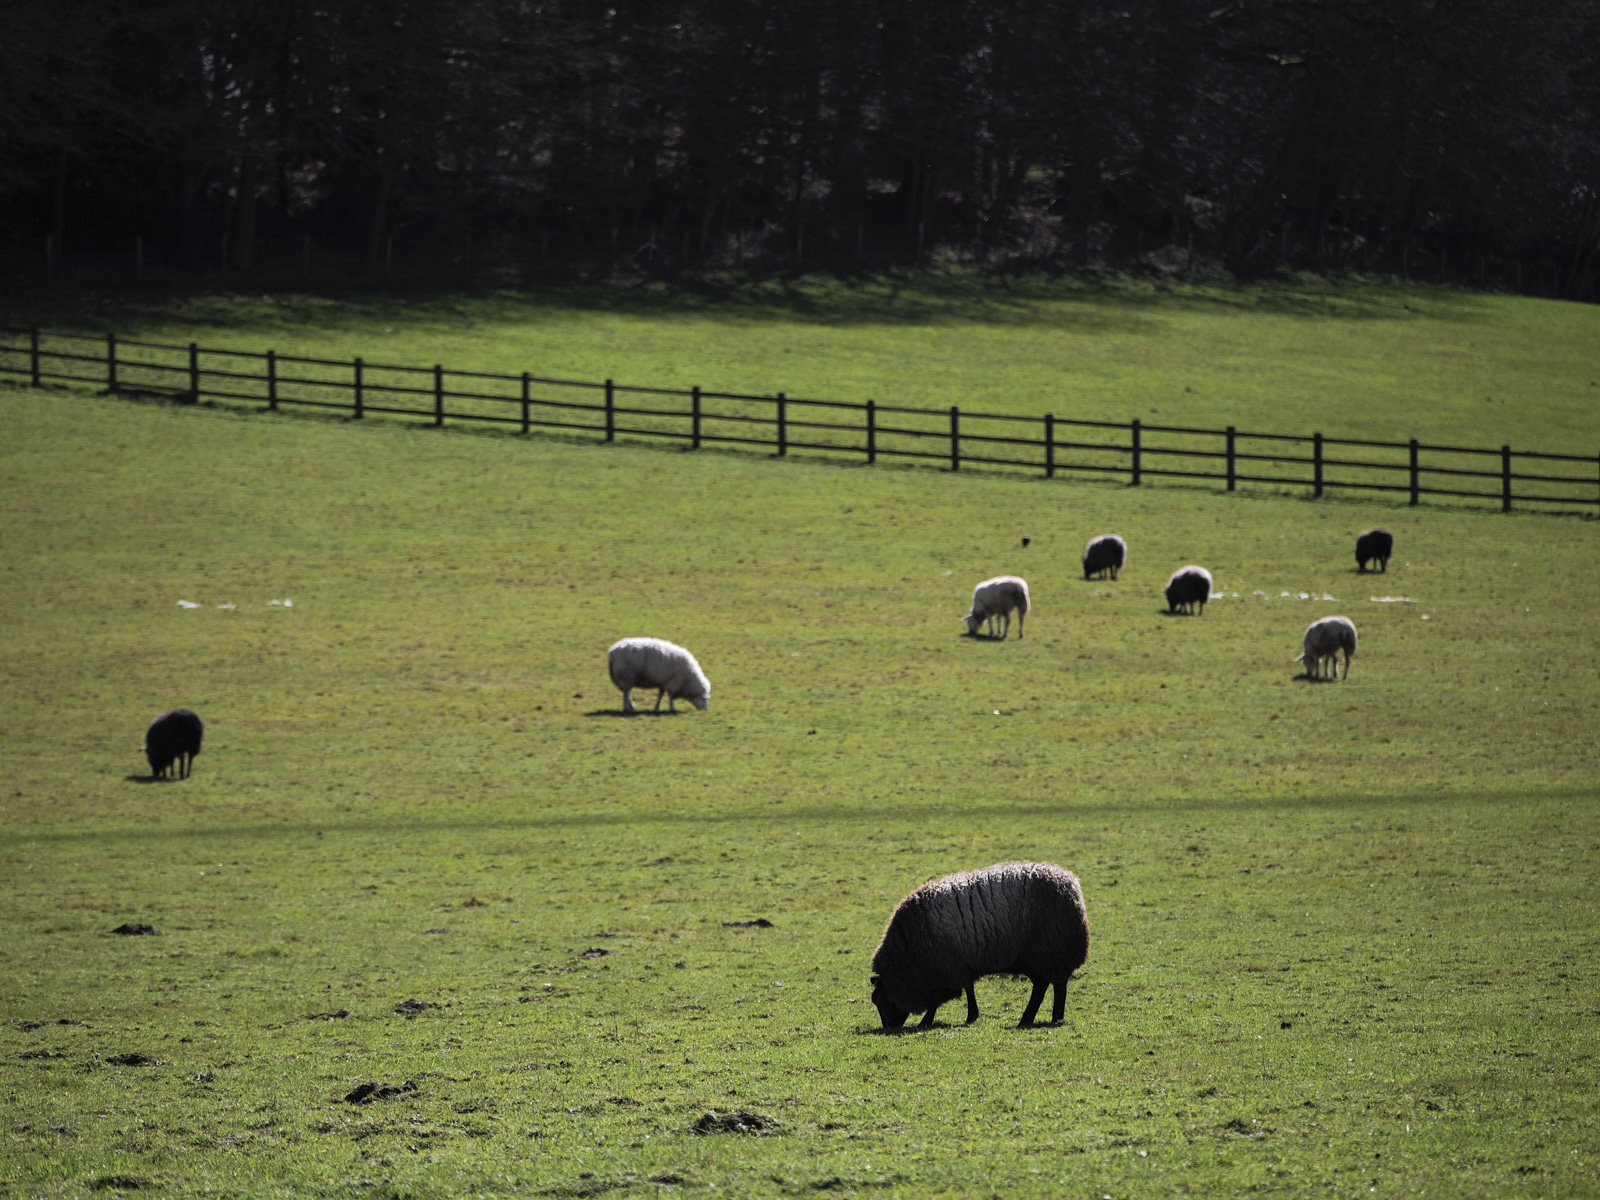 Landscape photo of a sheep in a field in the sun